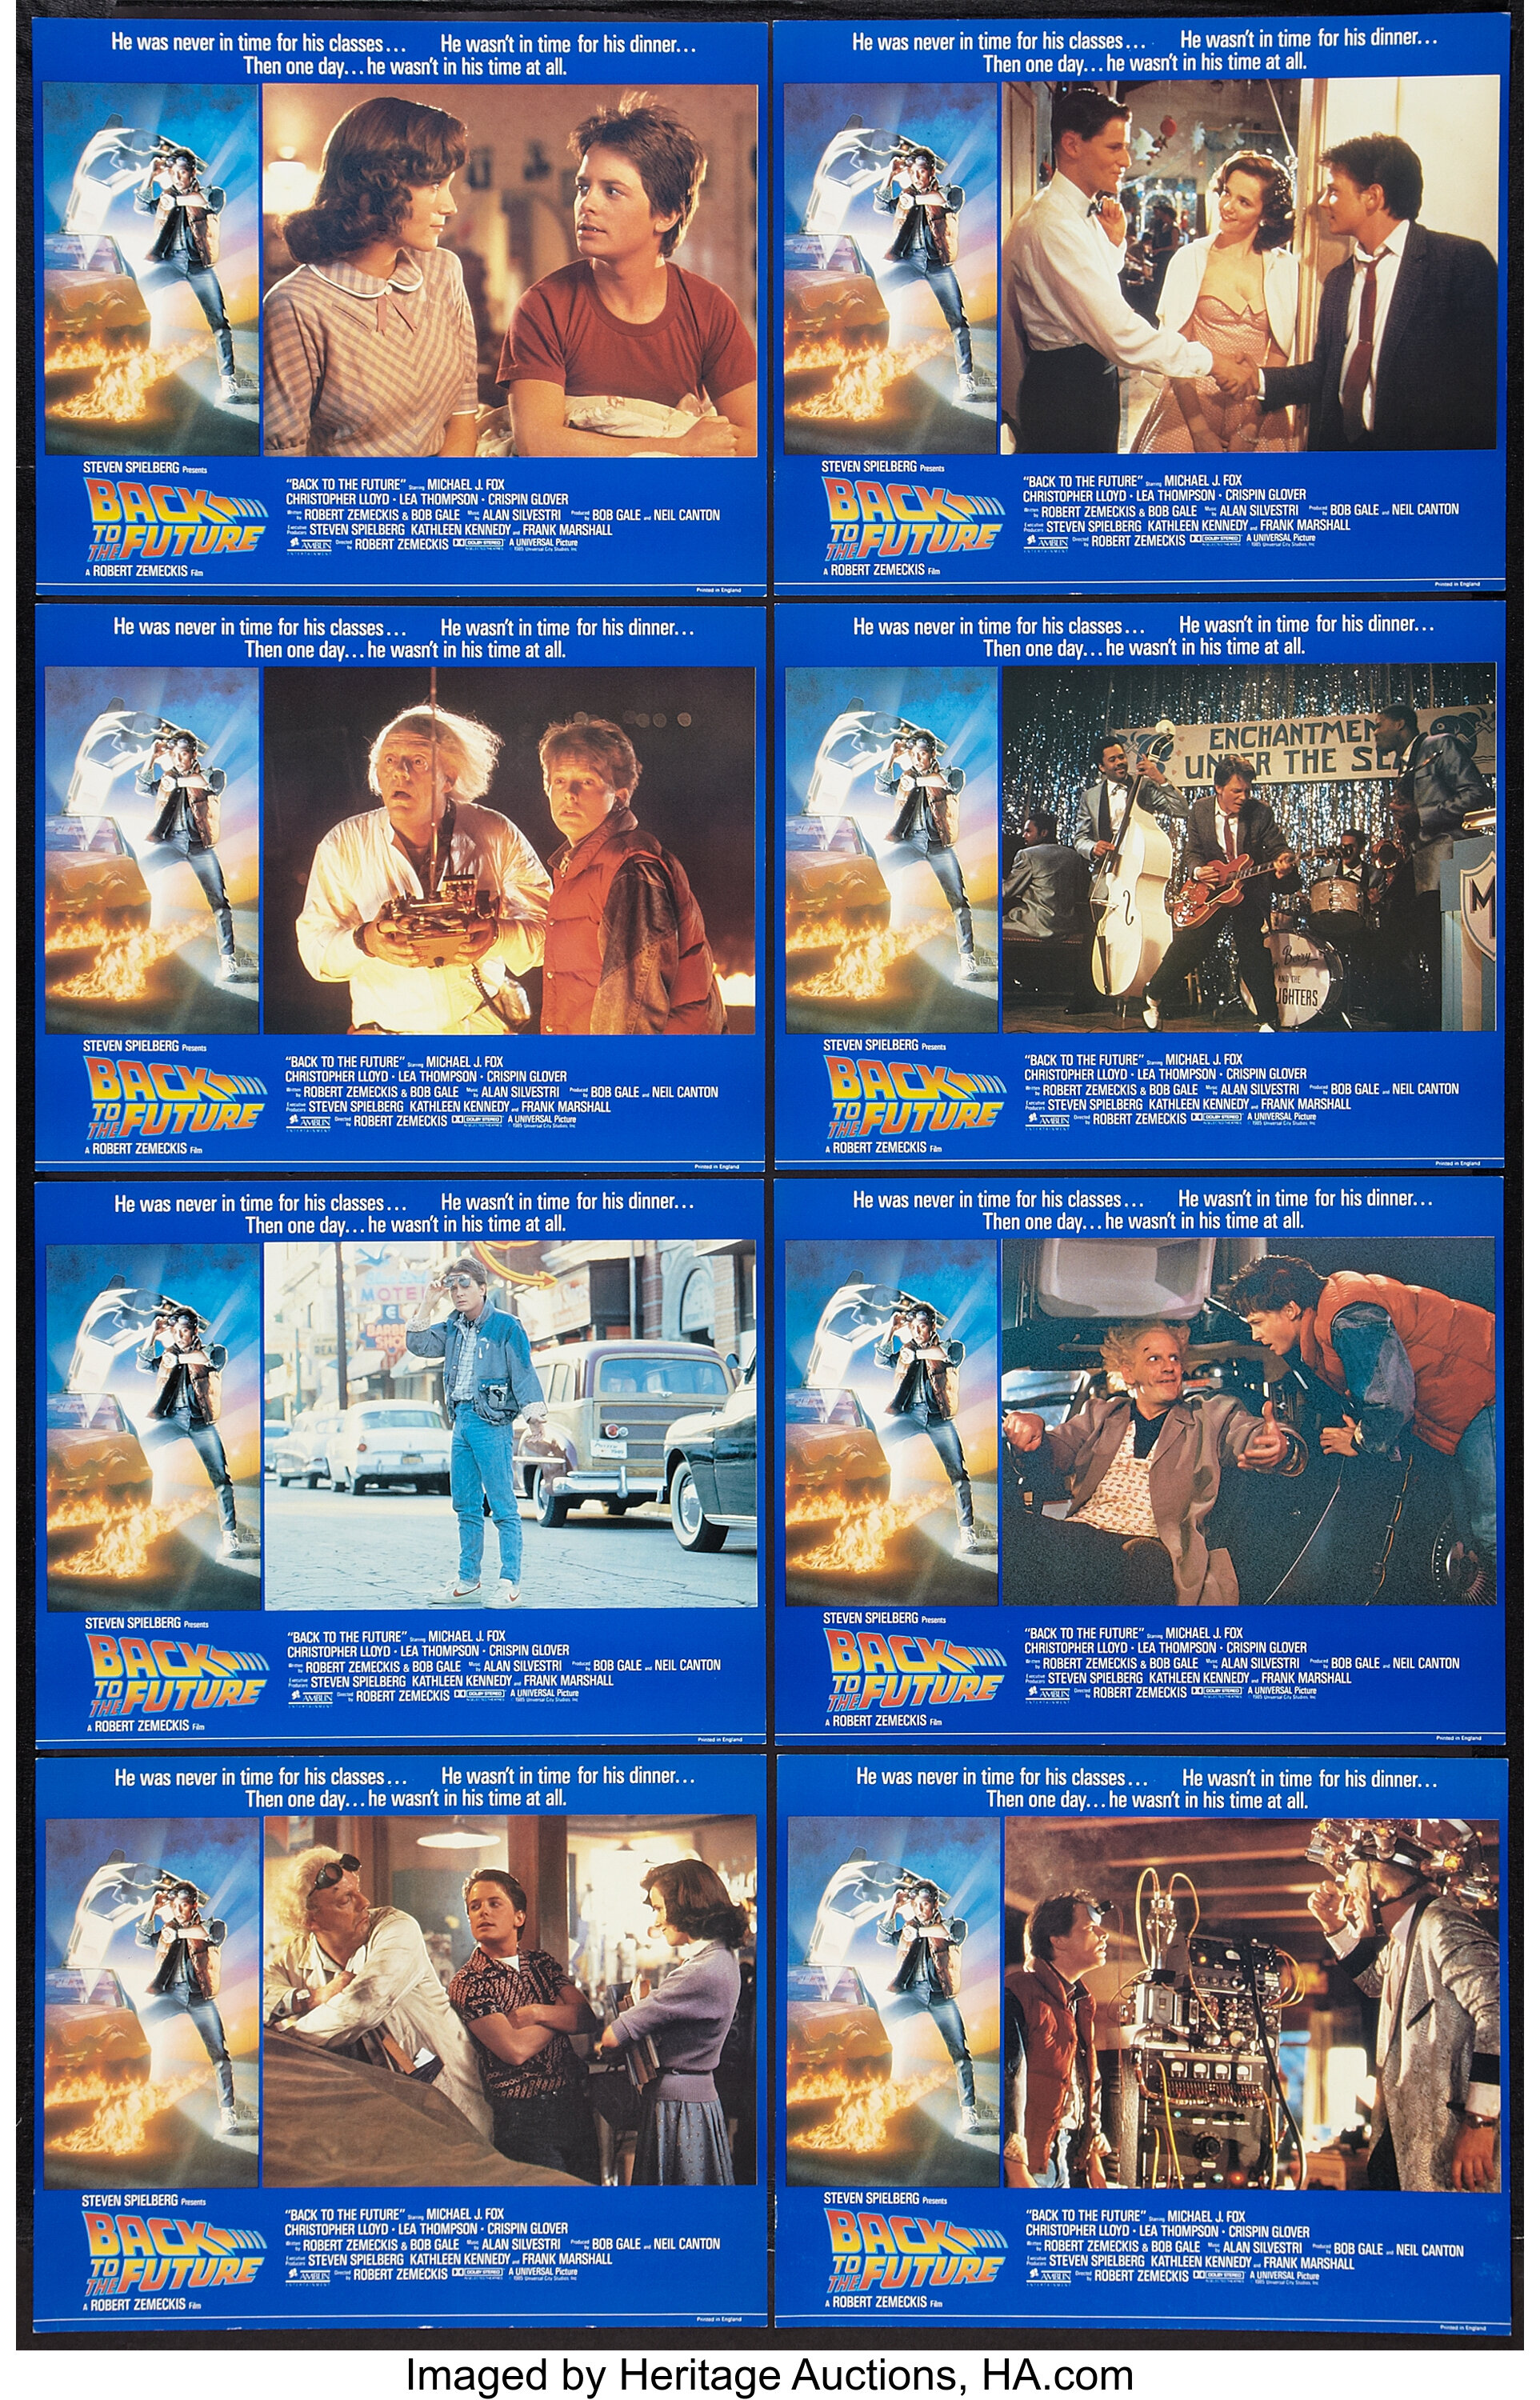 Back To The Future Universal 1985 British Lobby Card Set Of 8 Lot 54035 Heritage Auctions 4671